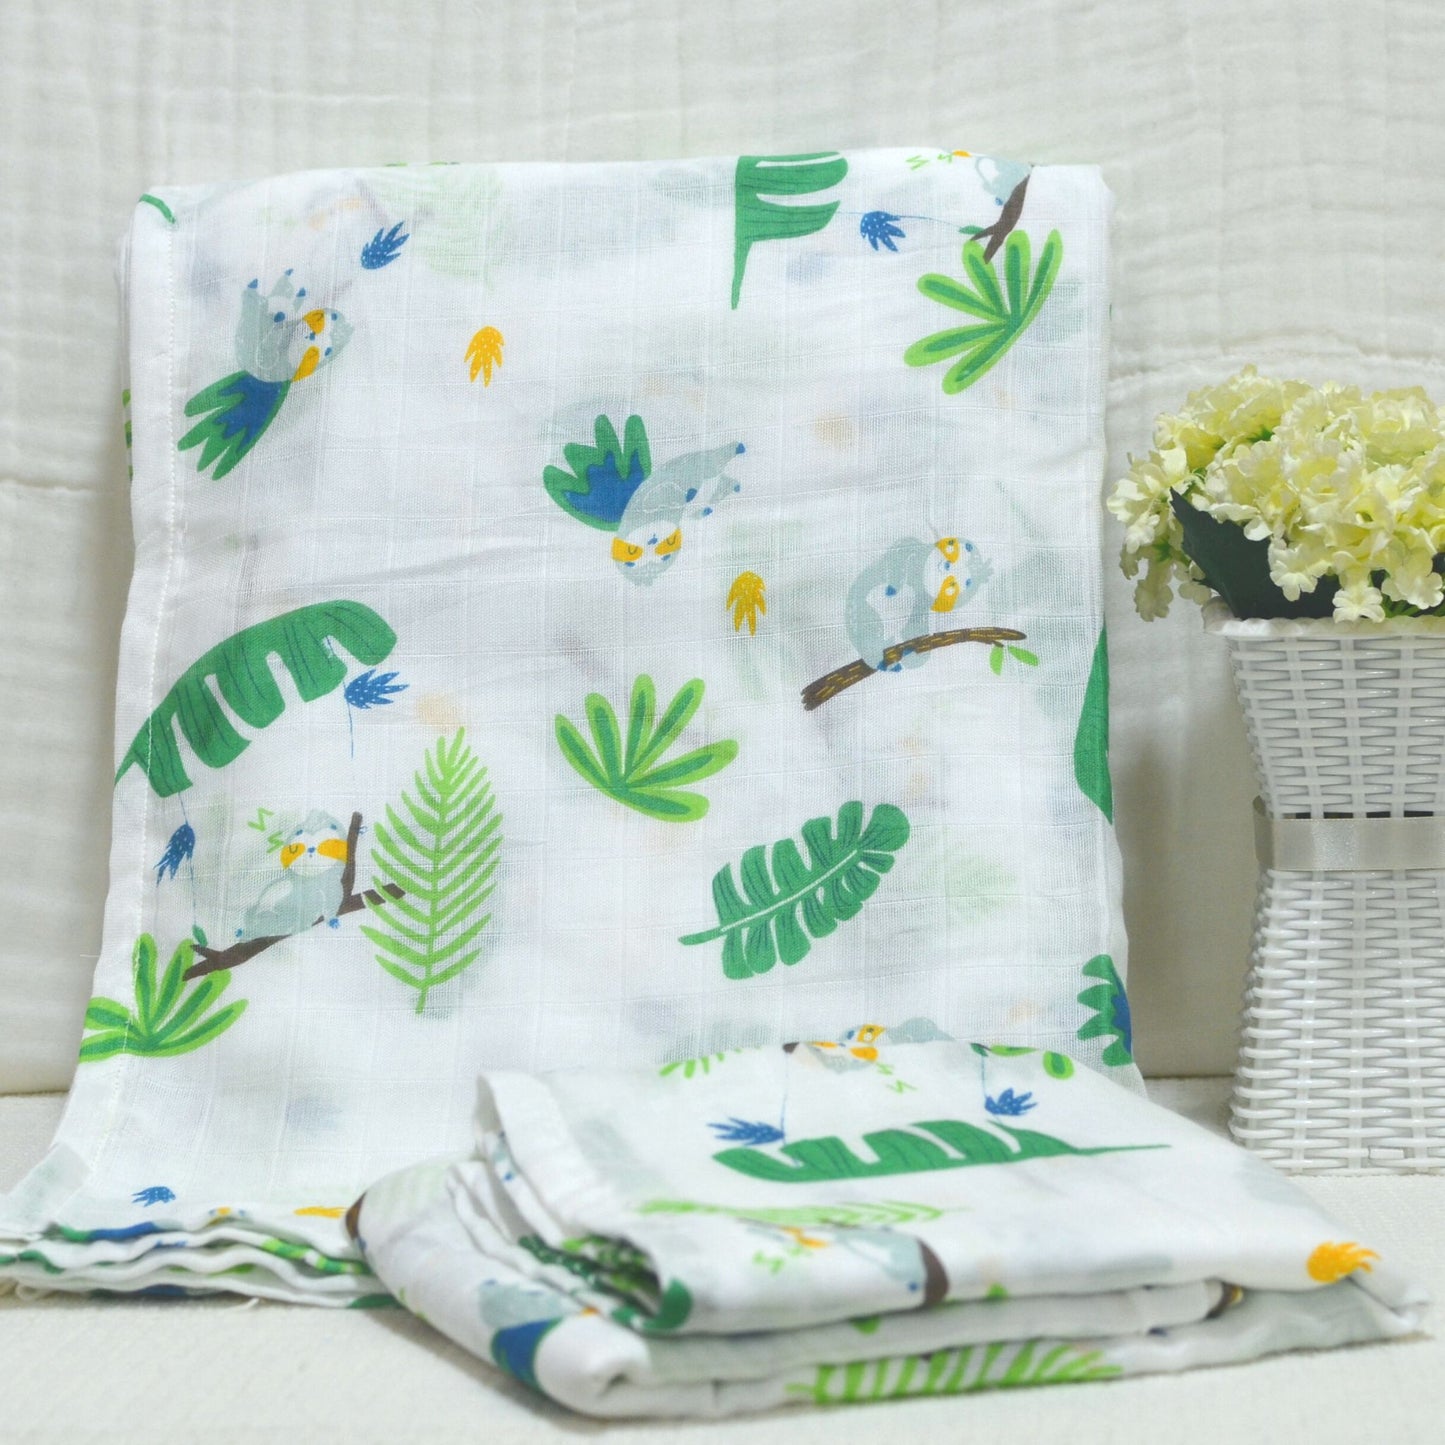 Muslin Swaddle - Printed - 70% Bamboo 30% Cotton 120x120cm